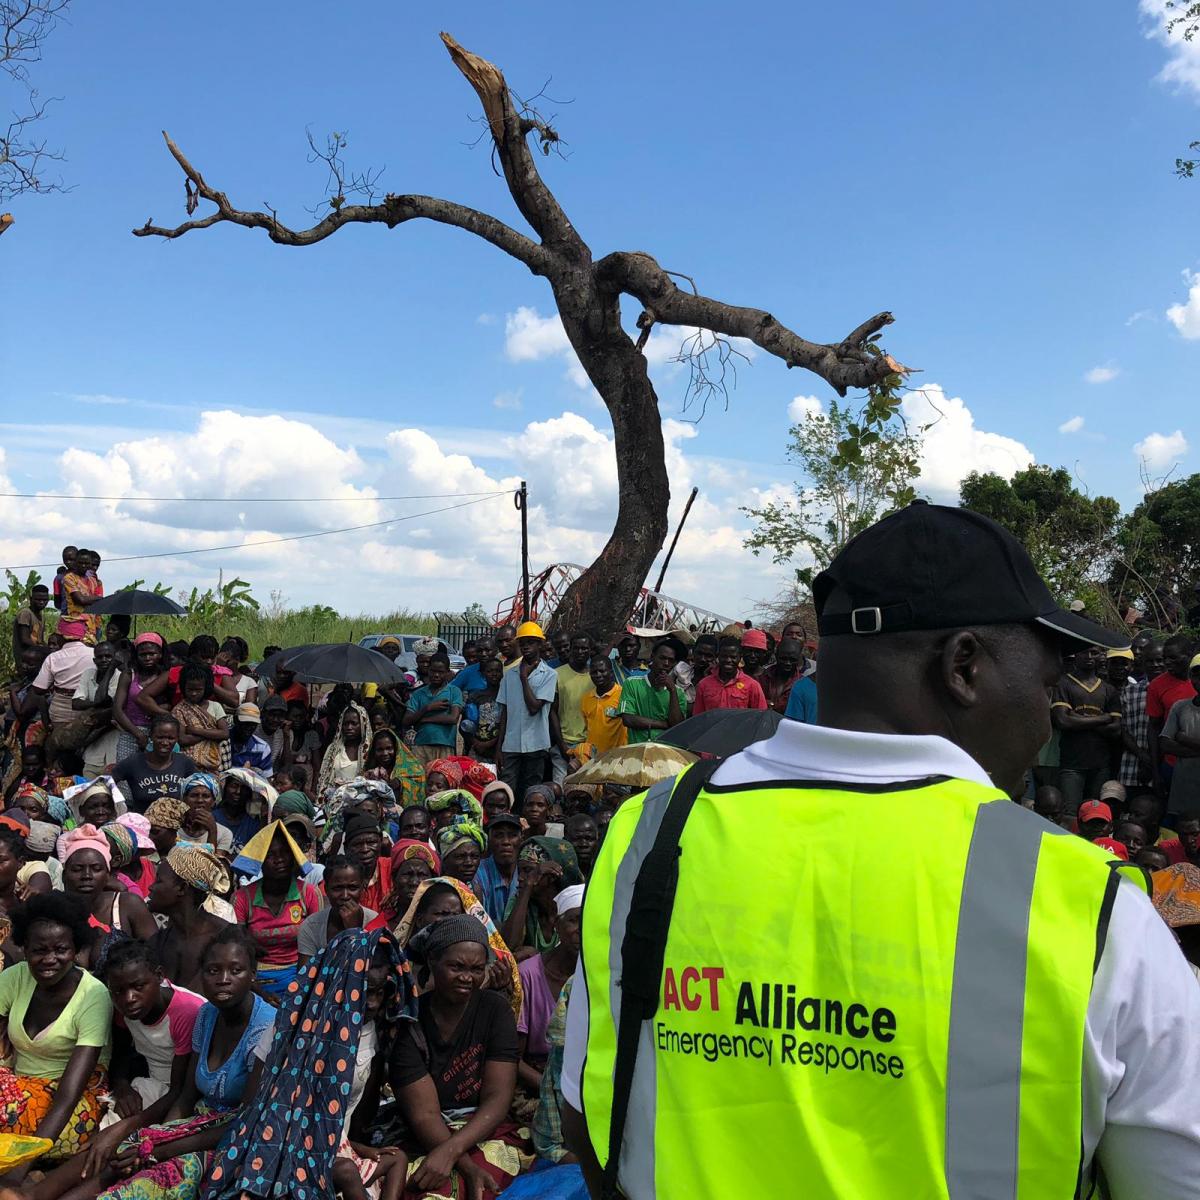 ACT members were the first agencies to bring relief supplies to villages in Nhamatanda District in Mozambique after the Cyclone Idai. ACT Alliance provided life-saving humanitarian relief after Cyclone Idai affected hundreds of thousands in Mozambique, Zimbabwe and Malawi in 2019. Photo: Photo: Alwynn Javier/ACT